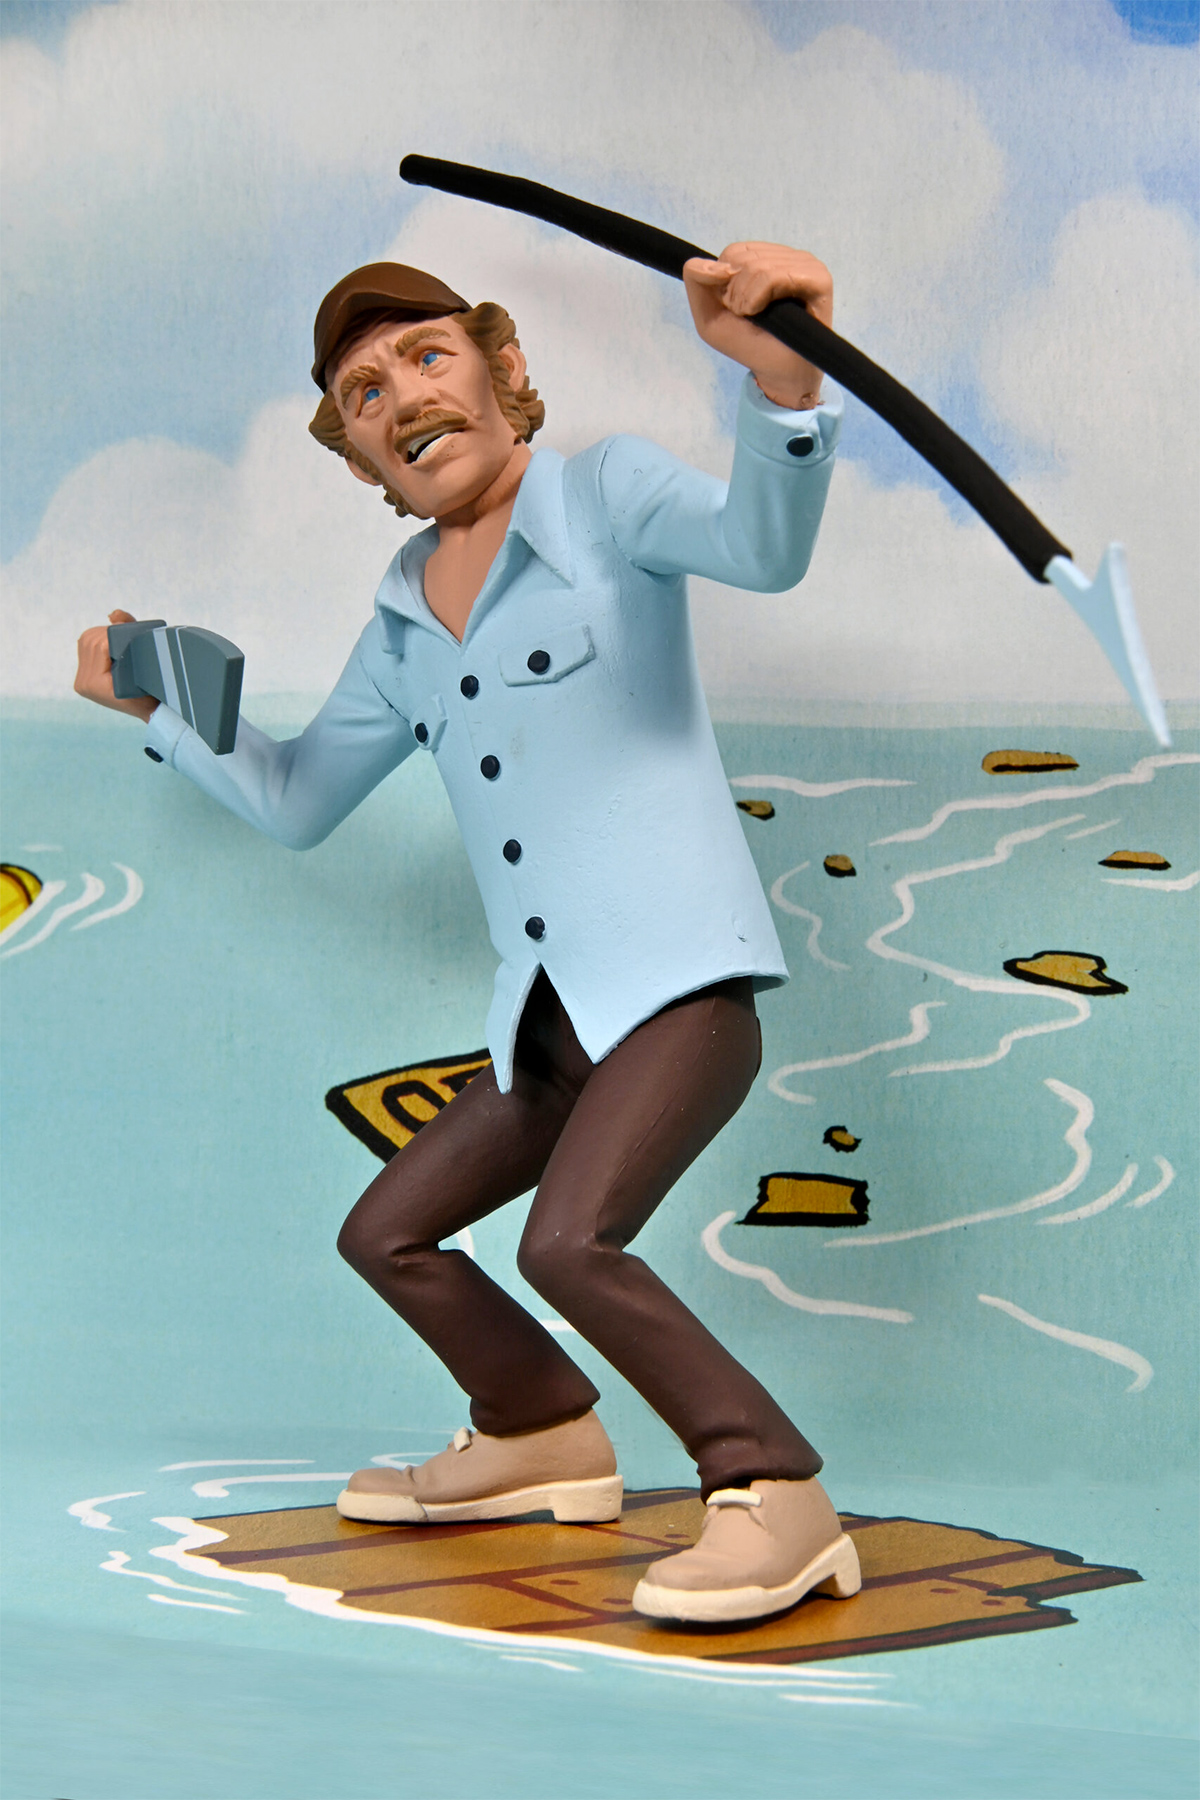 Jaws Toony Terrors: Quint and Shark Action Figures 2-Pack